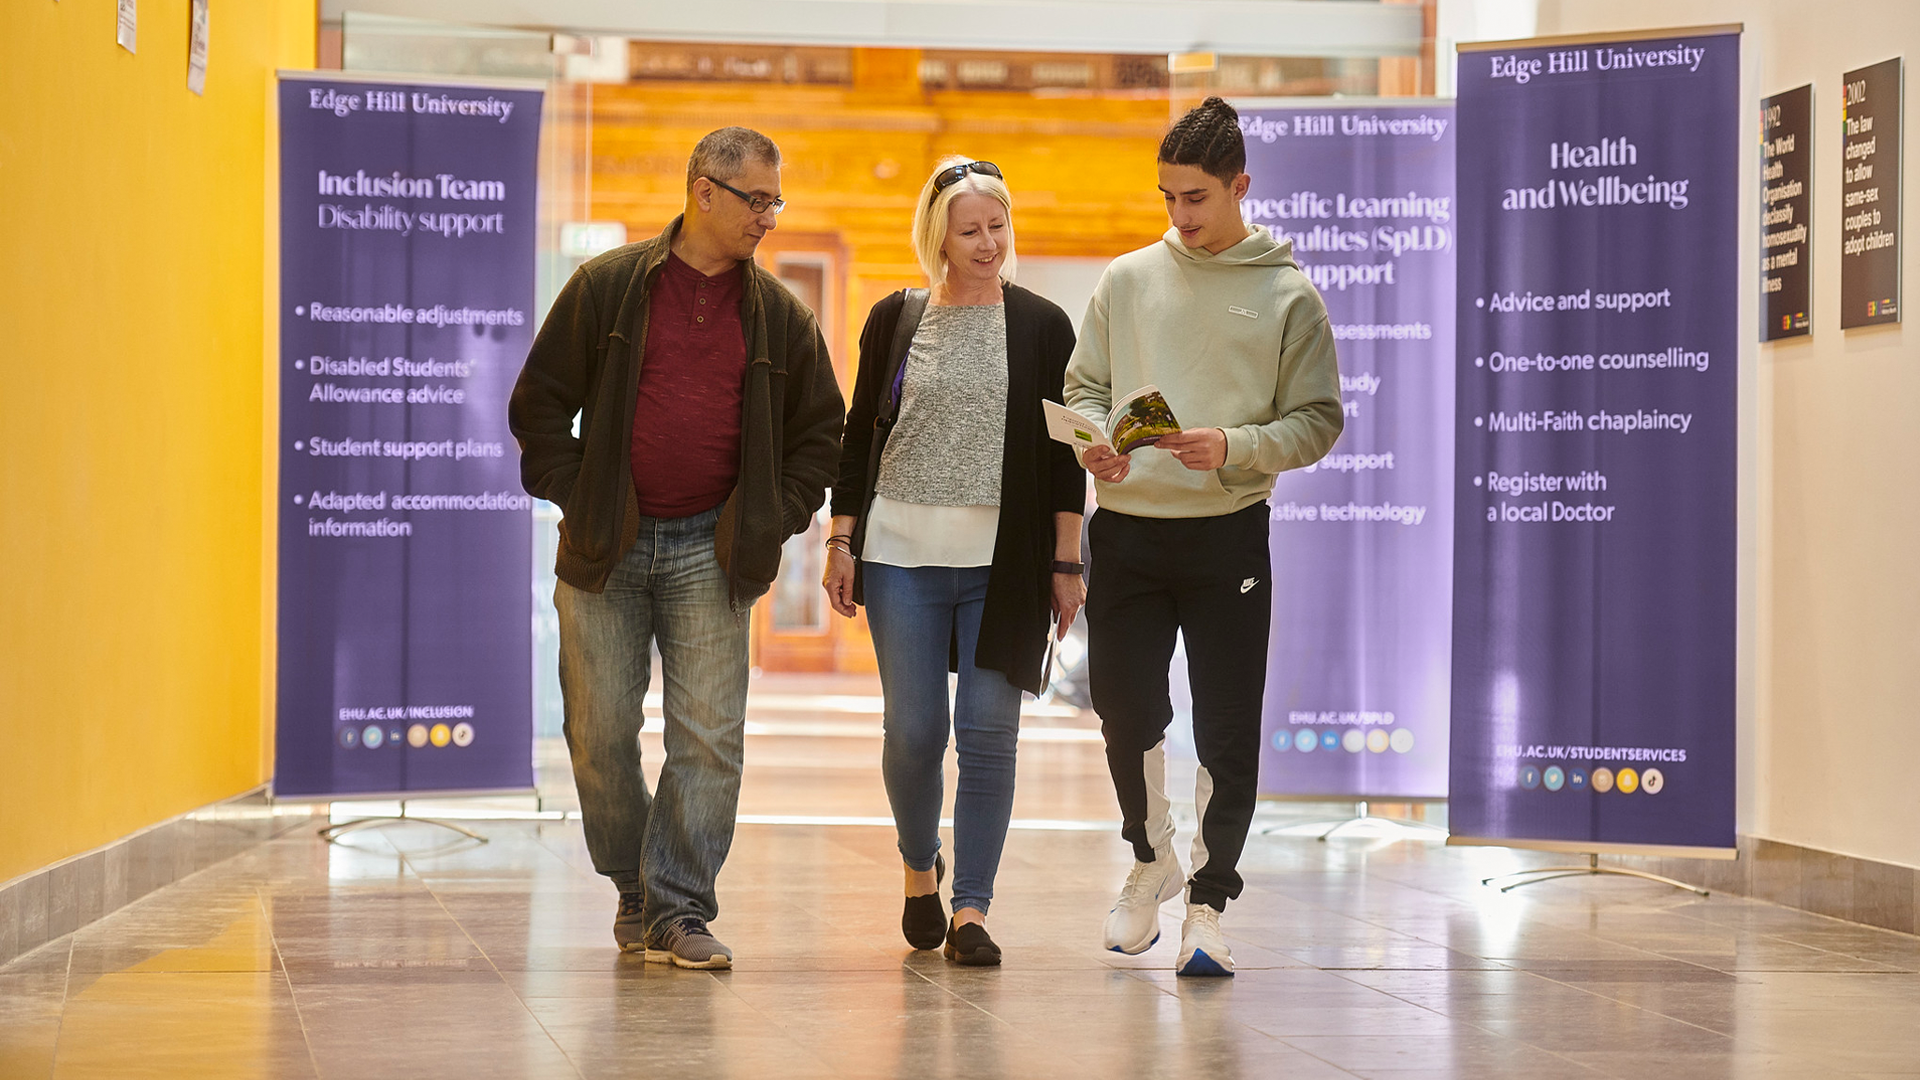 Student and their parents walk through Hale Hall on an open day. Signs advertising Health and Wellbeing and the Inclusion Team can be seen in the background.